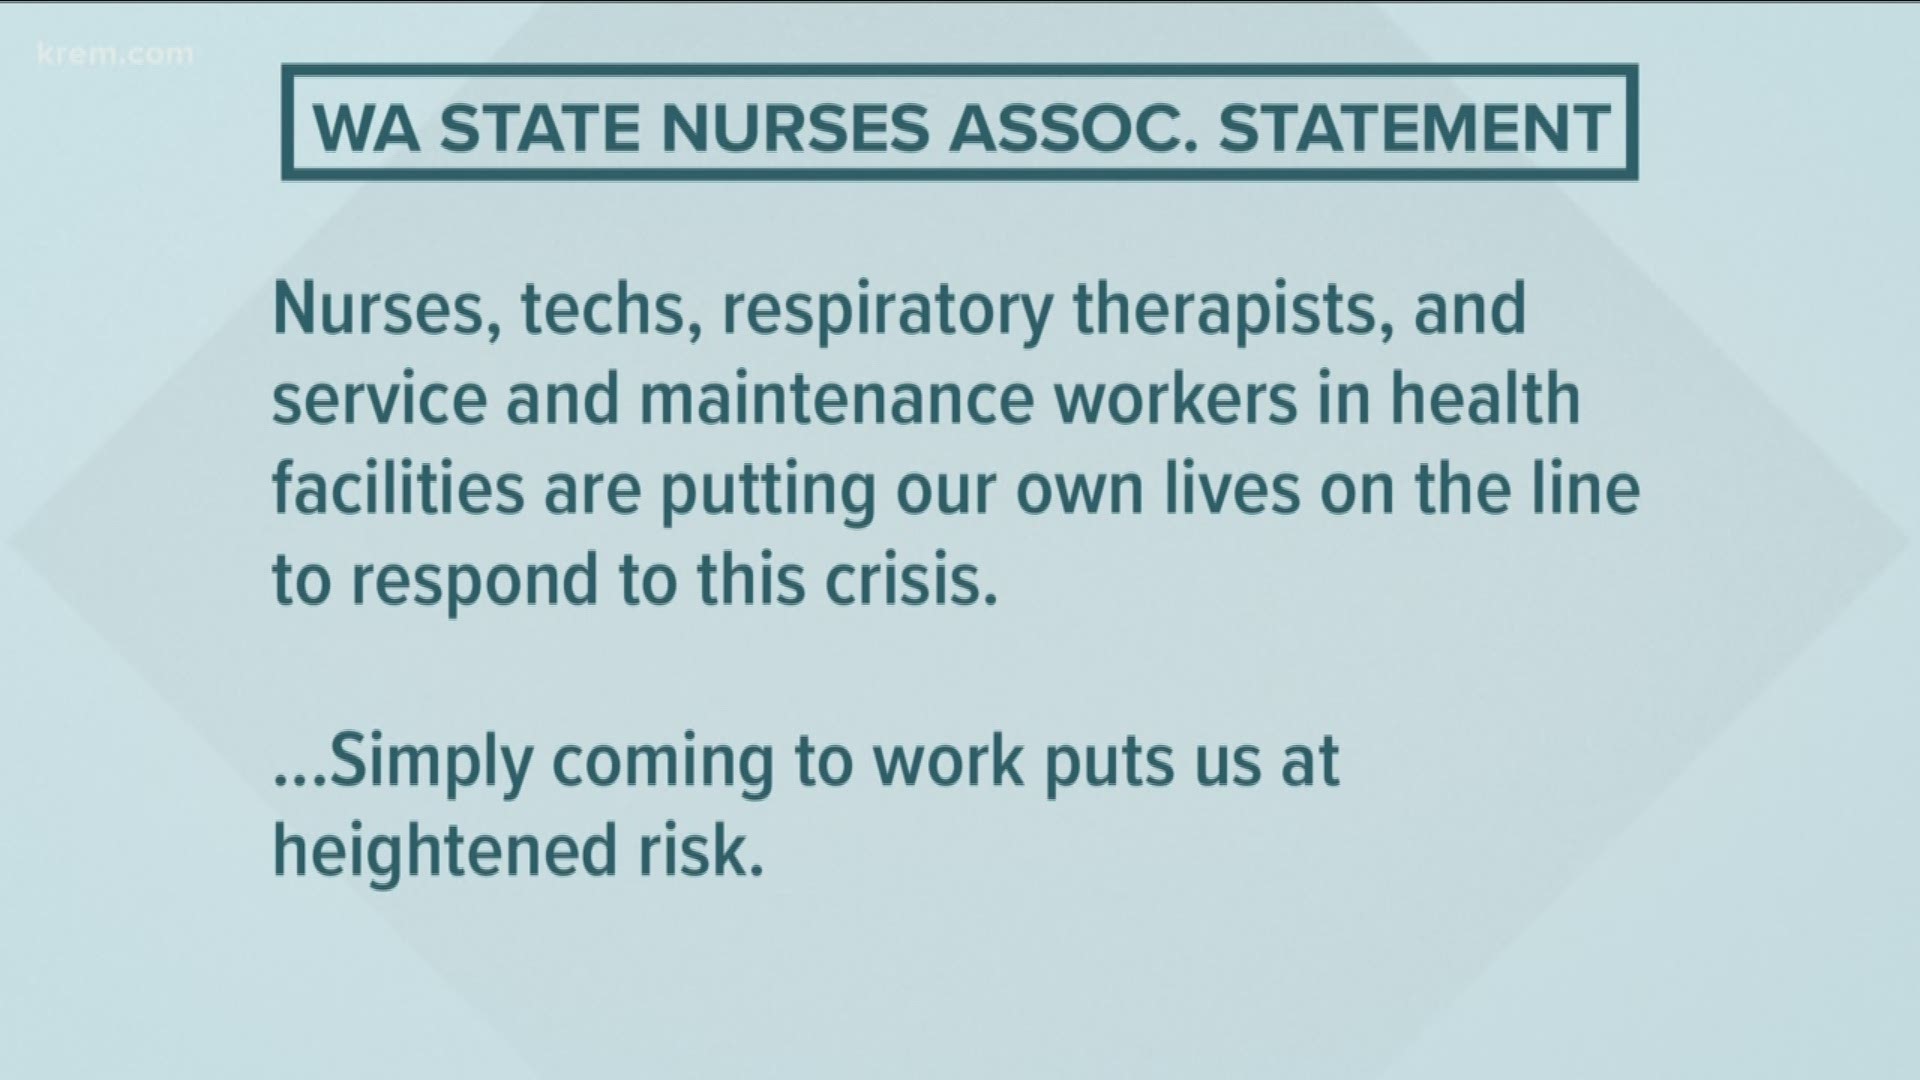 "Nurses, techs, respiratory therapists, and service and maintenance workers in health facilities are putting our own lives on the line to respond to this crisis."